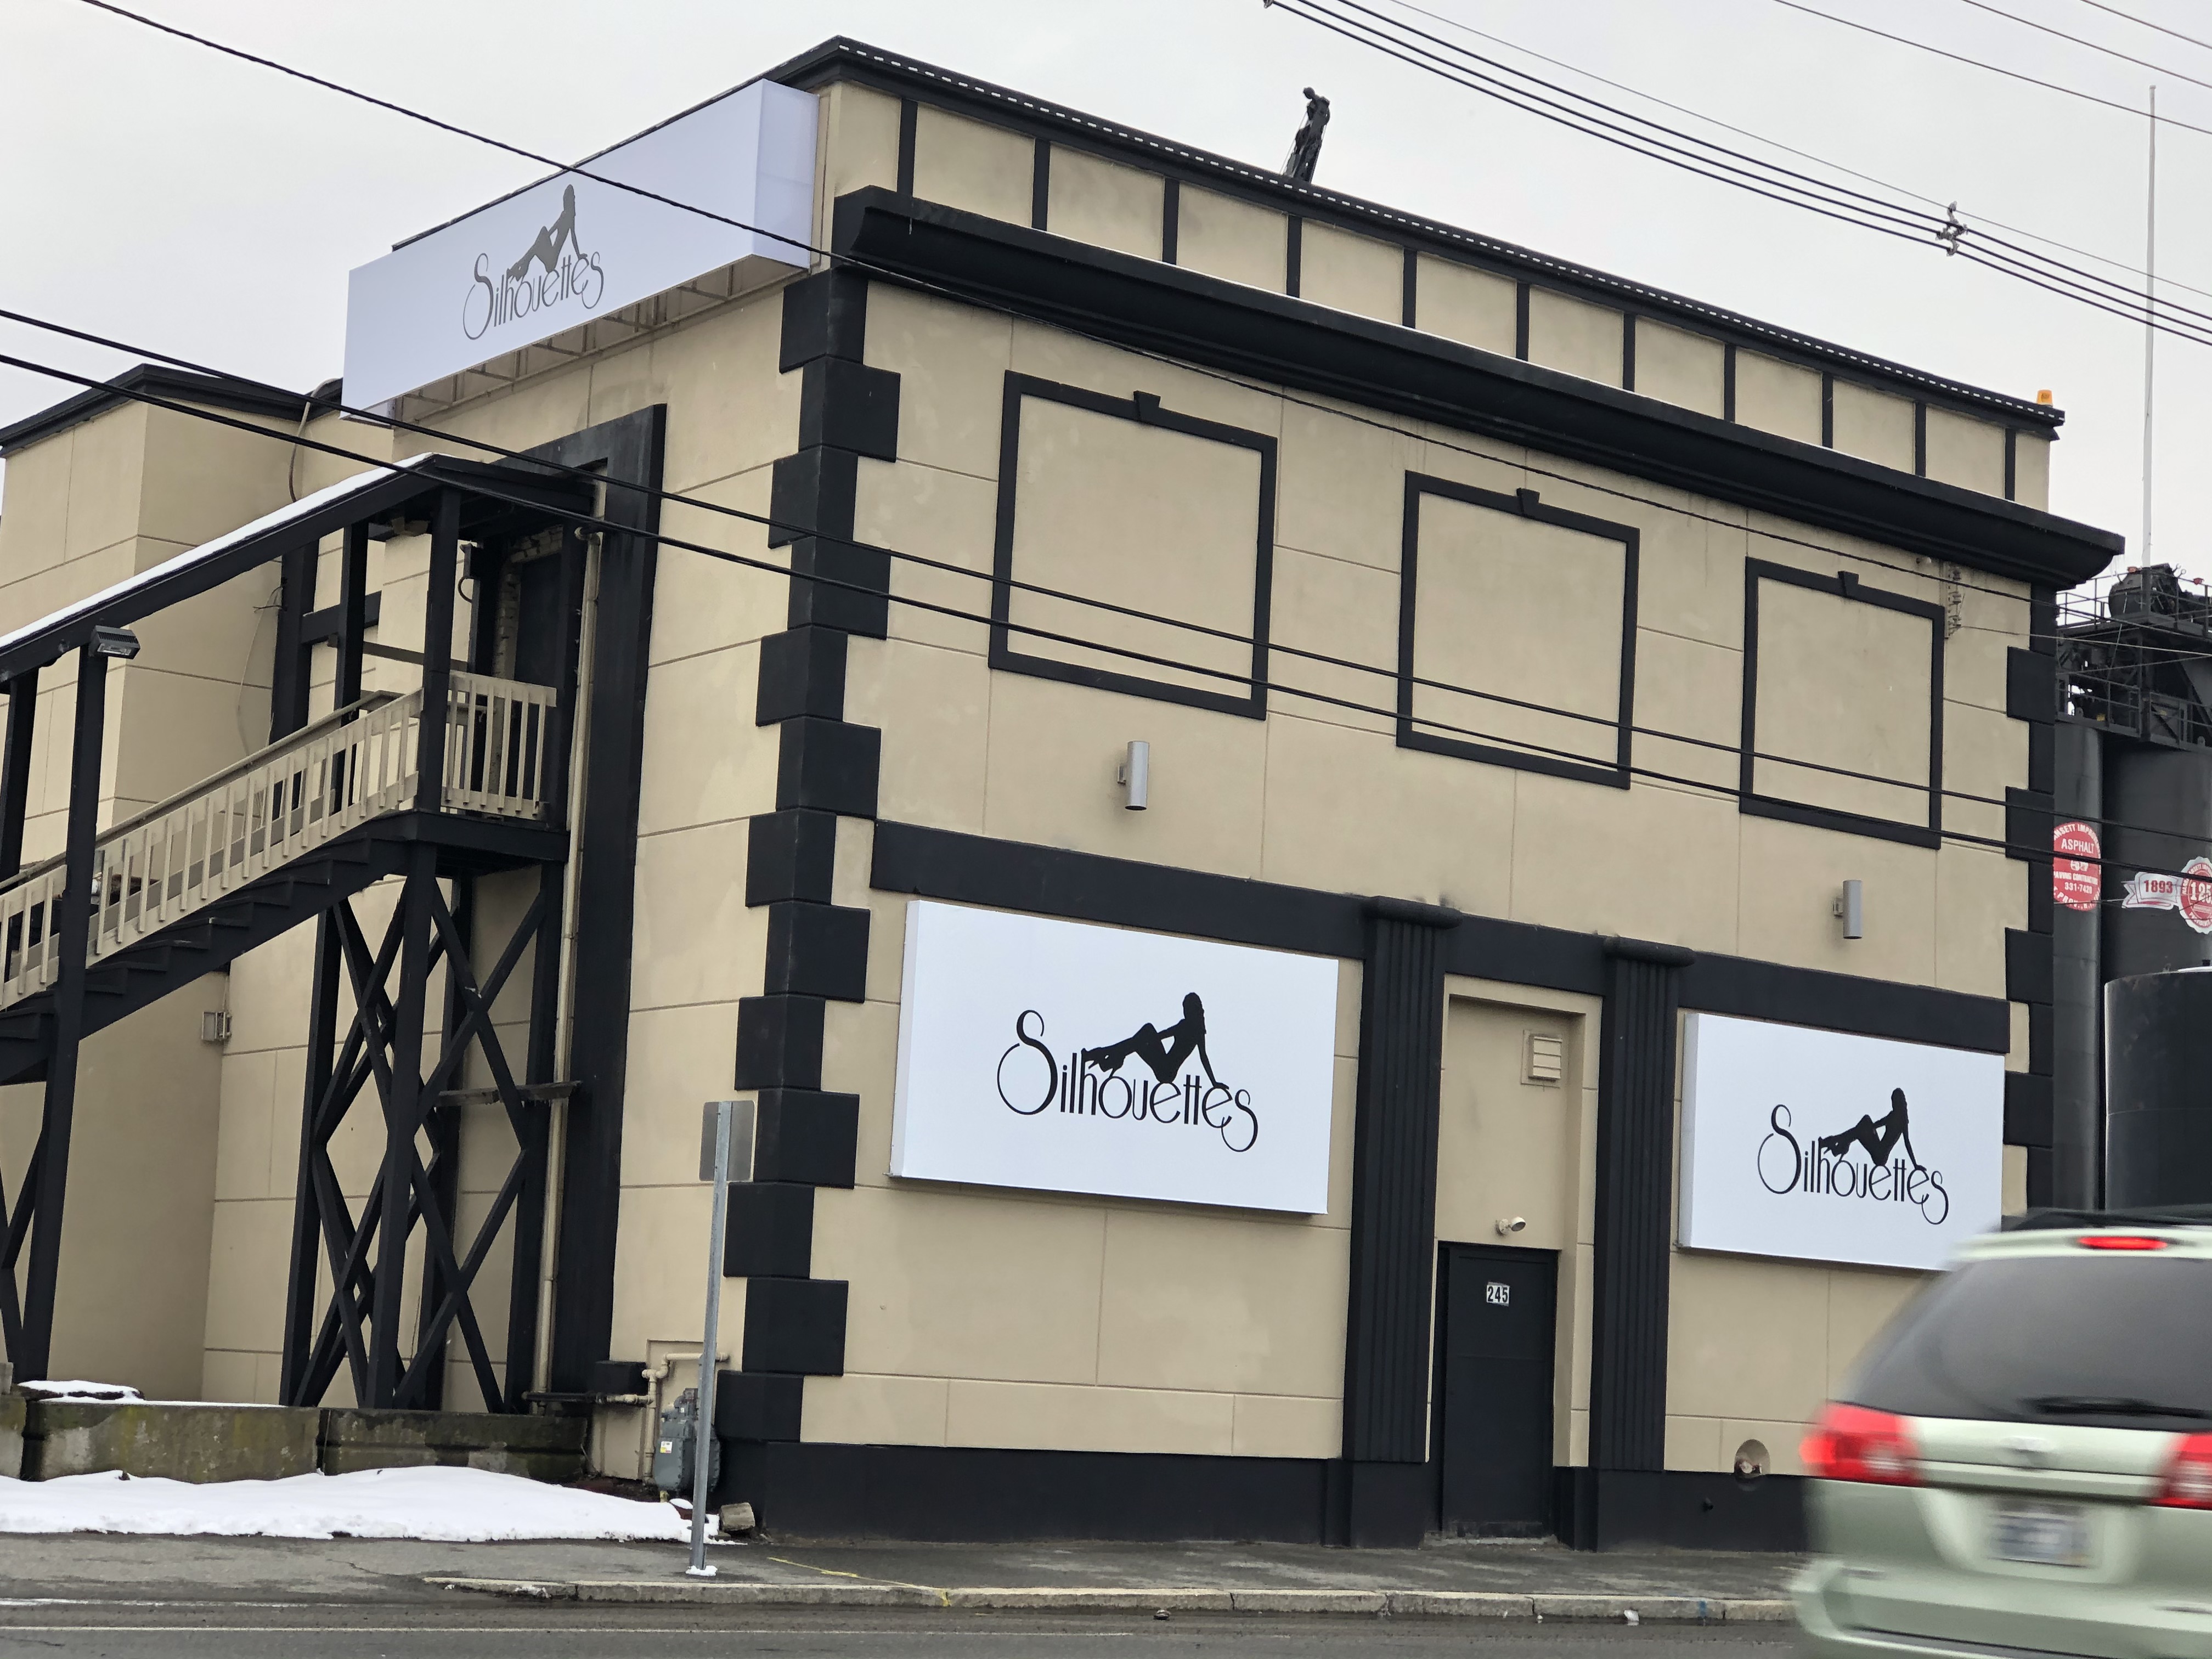 A strip club site in Providence tries to shake off its sordid past photo